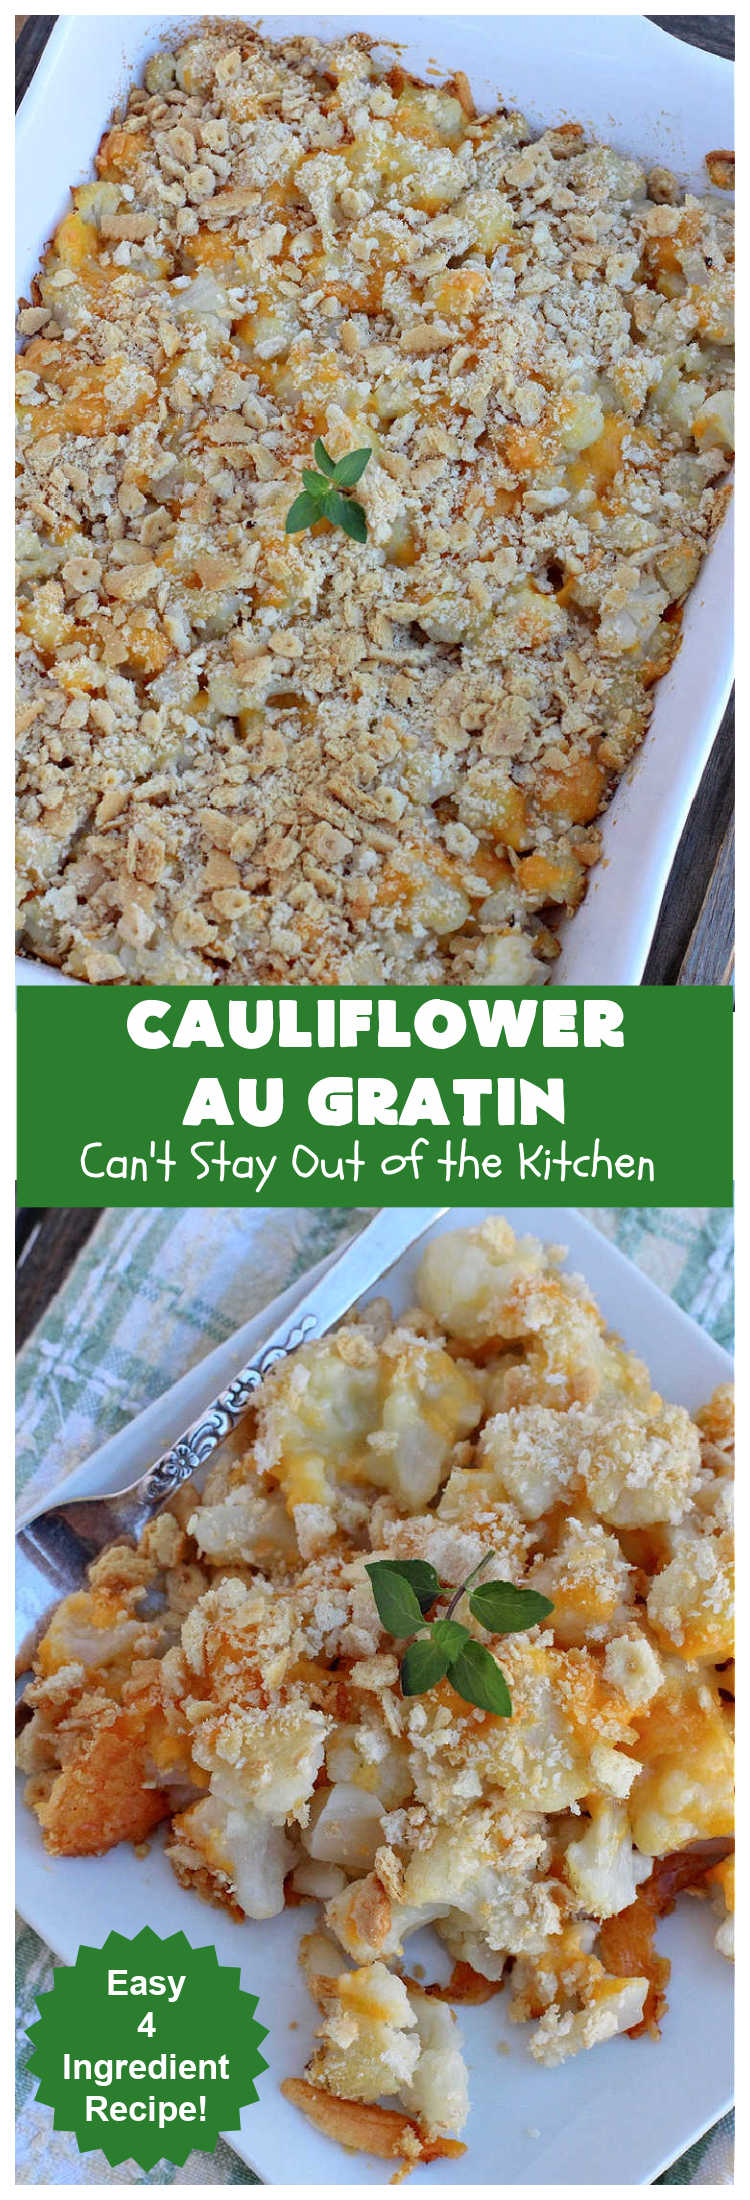 Cauliflower Au Gratin | Can't Stay Out of the Kitchen